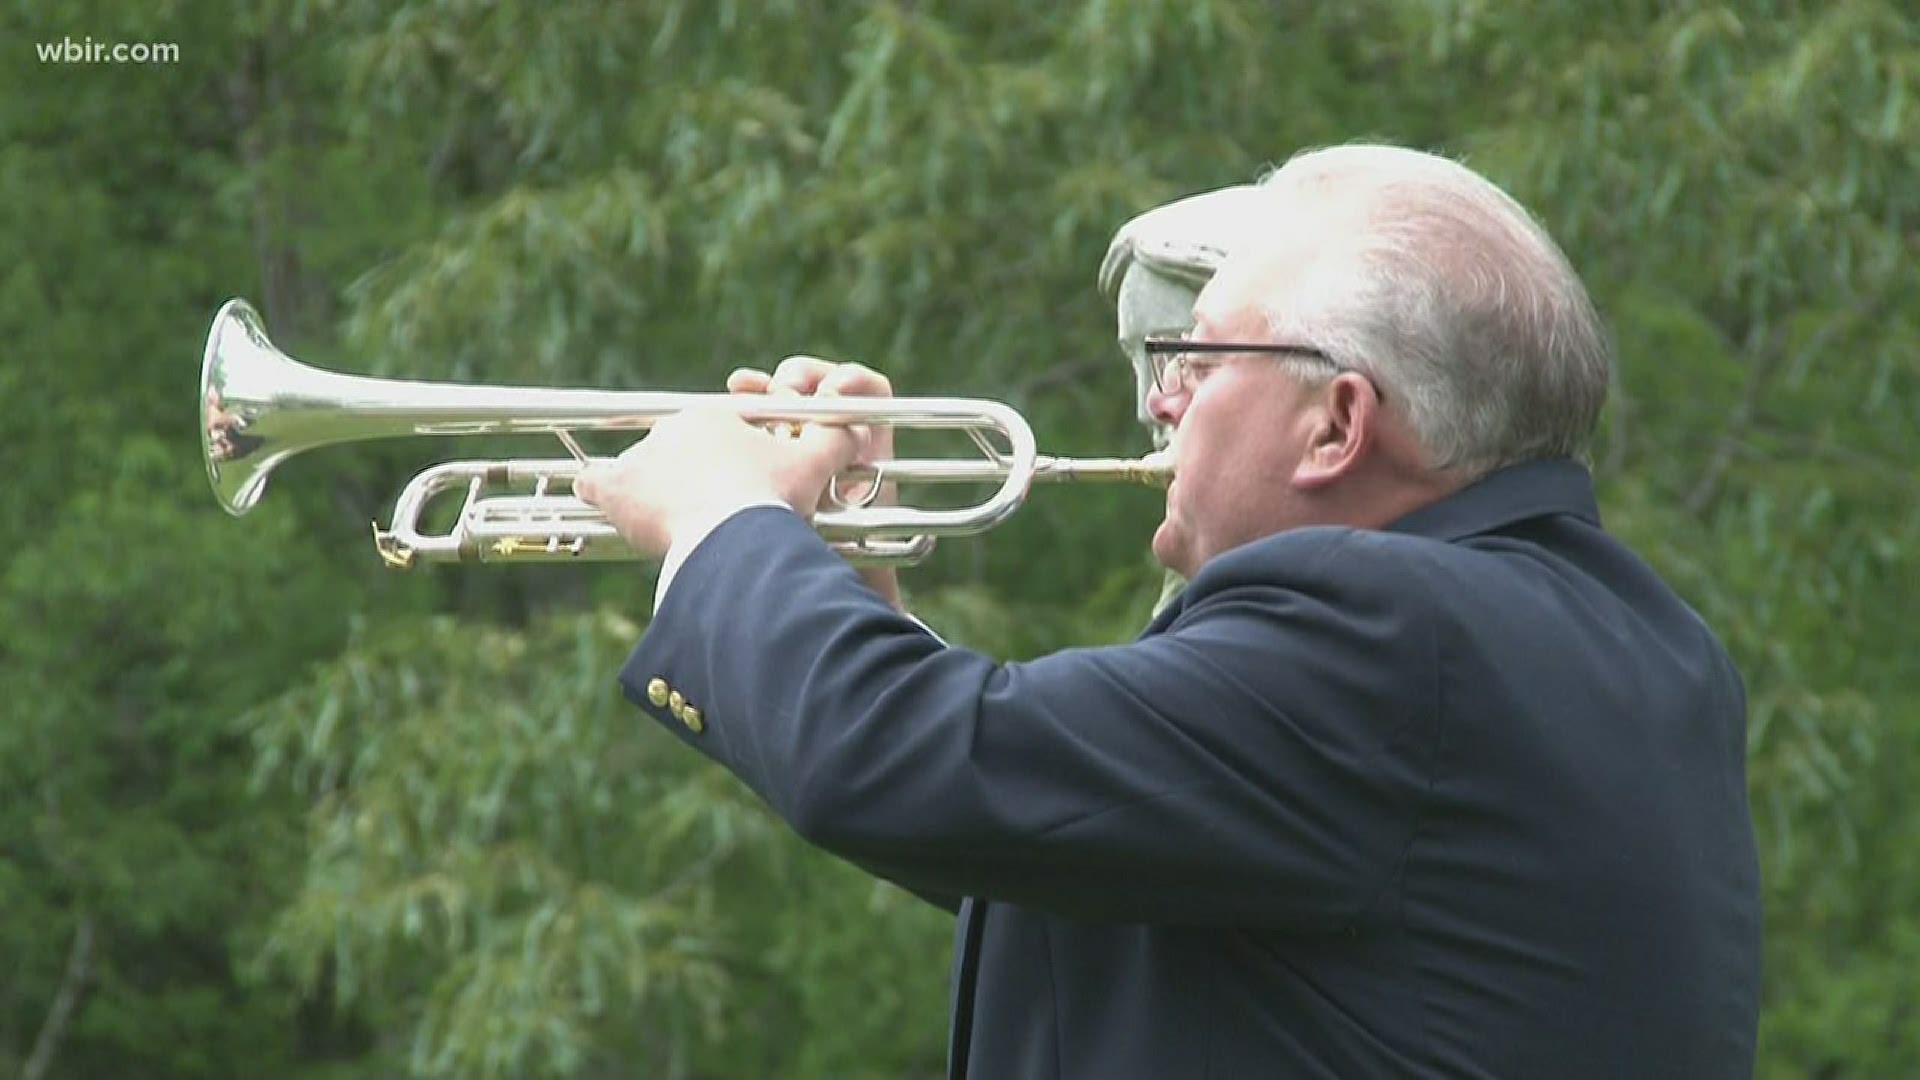 The nationwide event encouraged musicians to play Taps at 3 p.m. Memorial Day to remember the fallen.